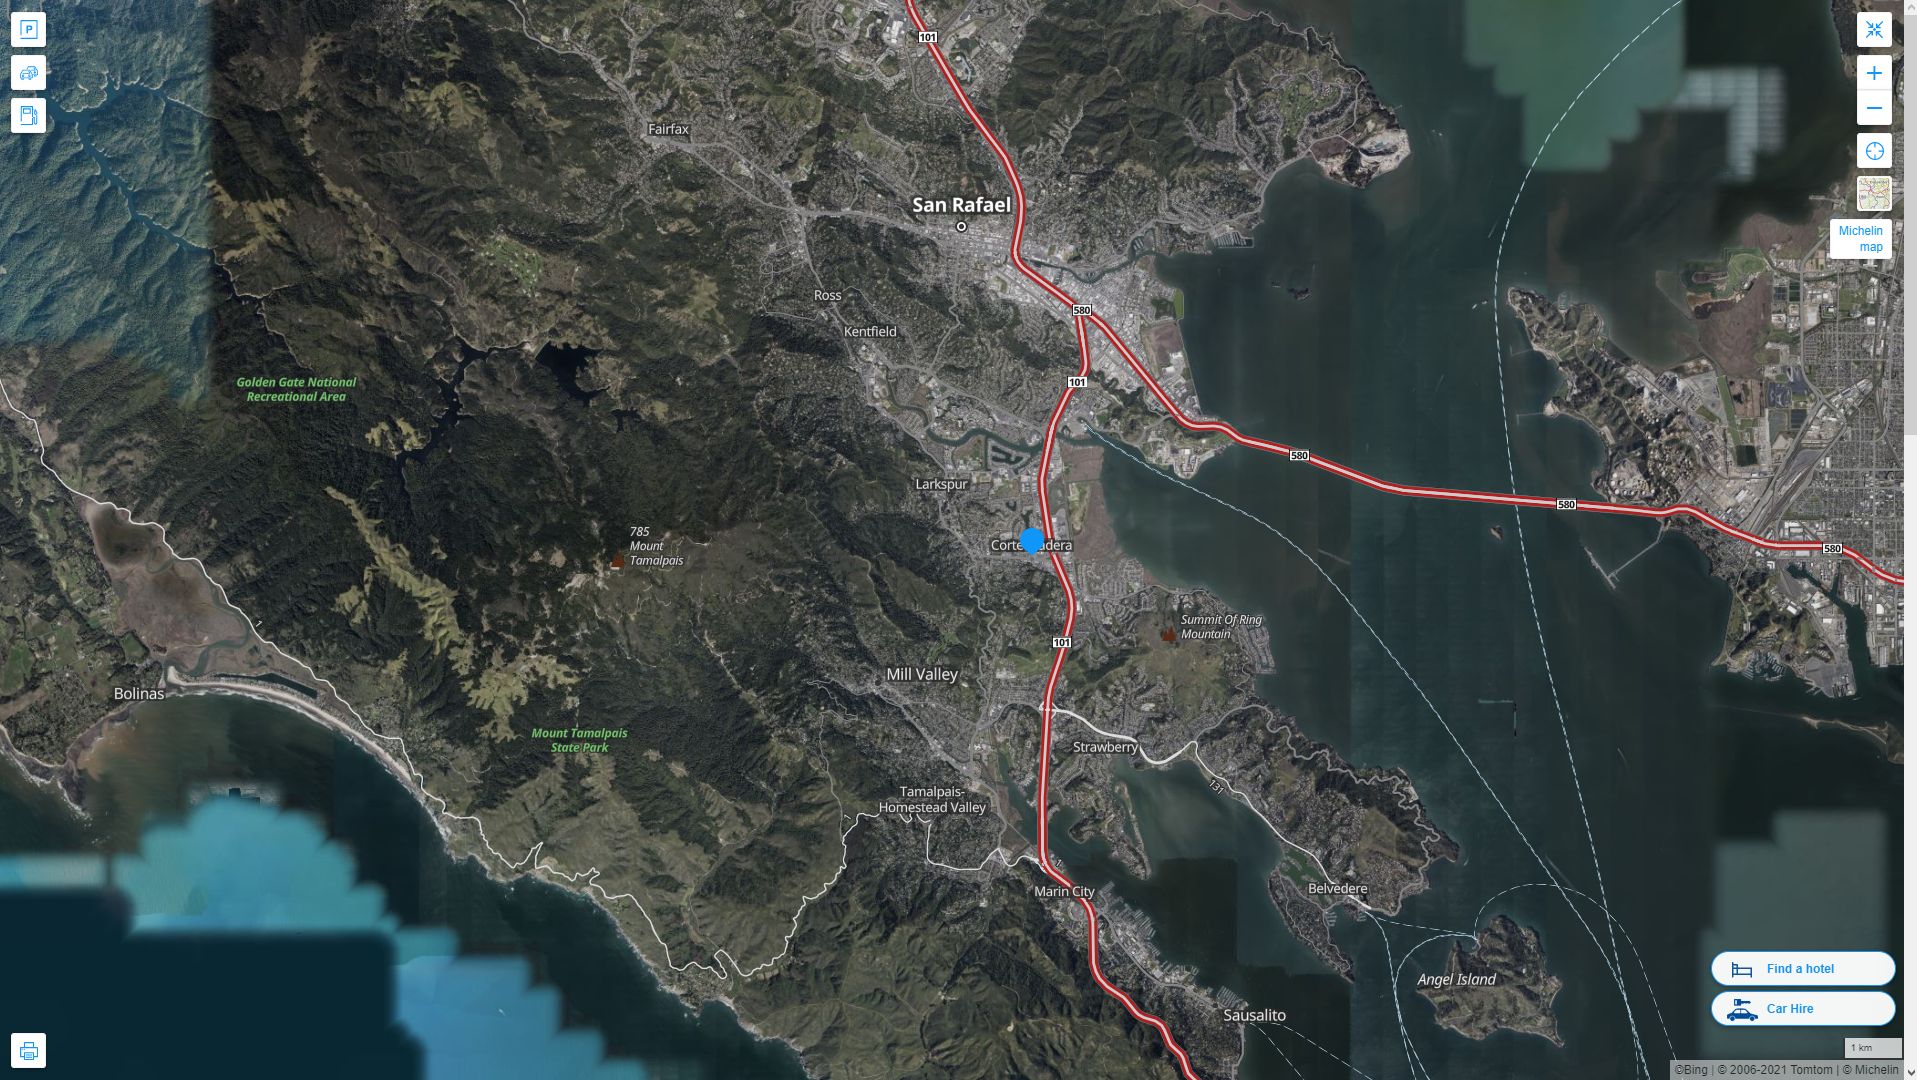 Corte Madera California Highway and Road Map with Satellite View